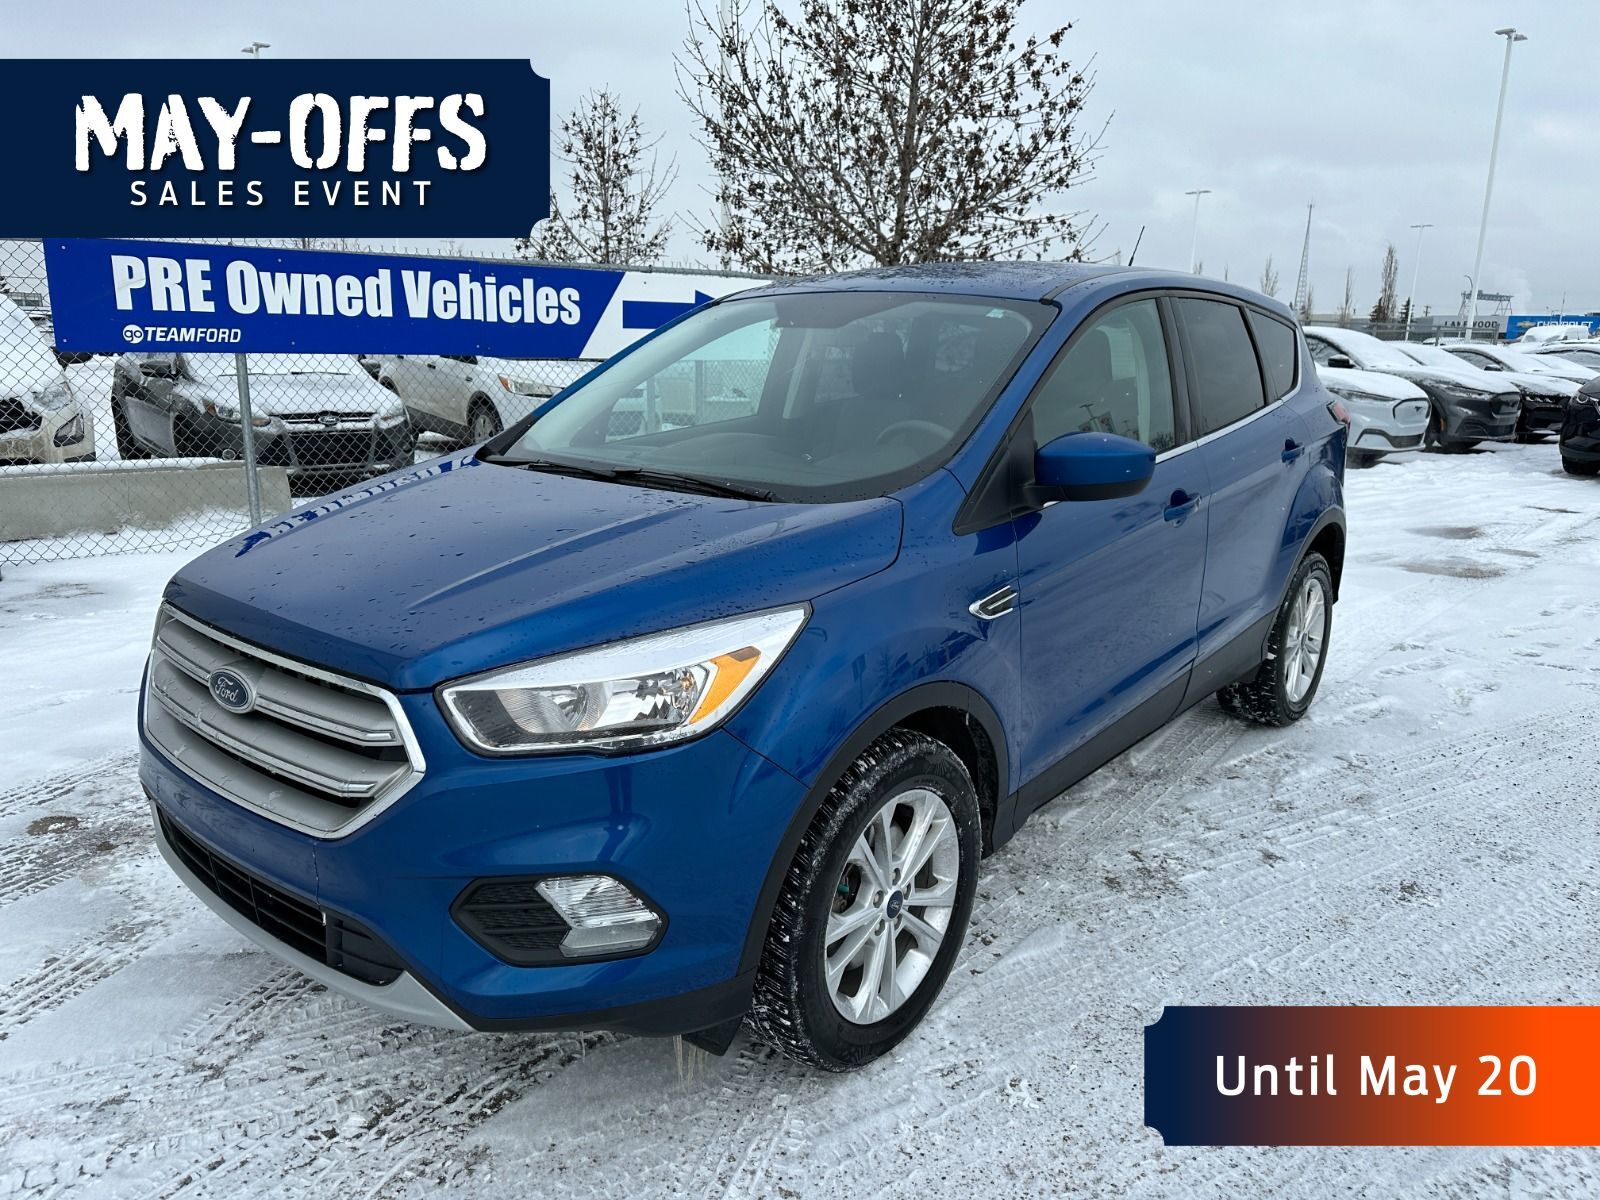 2019 Ford Escape 1.5L ECOBOOST ENG, SE, FORDPASS, KEYLESS ENTRY, RE